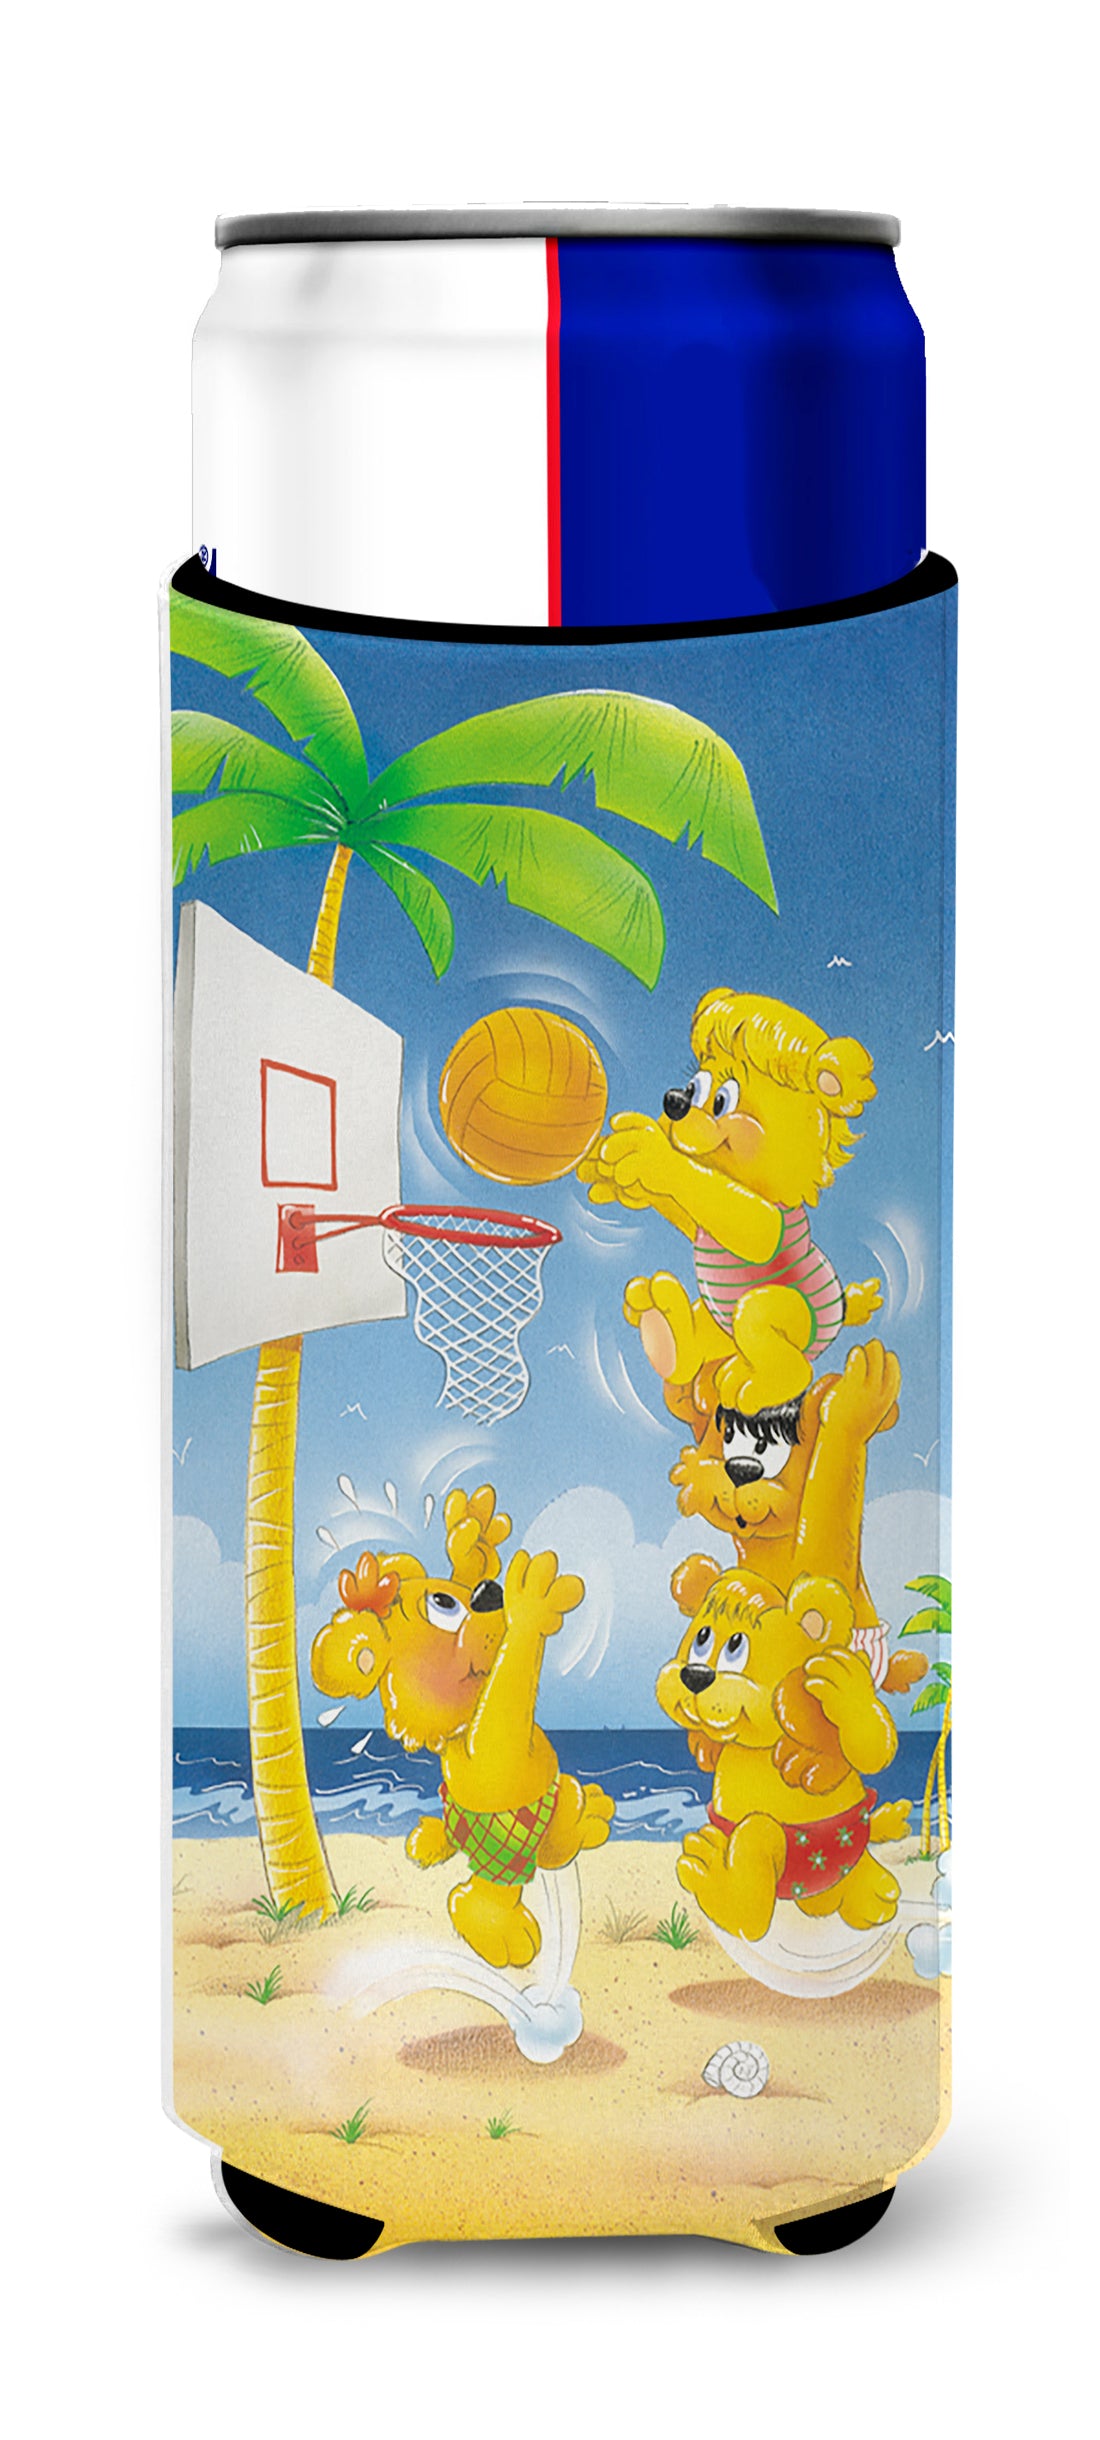 Bears playing Basketball  Ultra Beverage Insulators for slim cans APH0388MUK